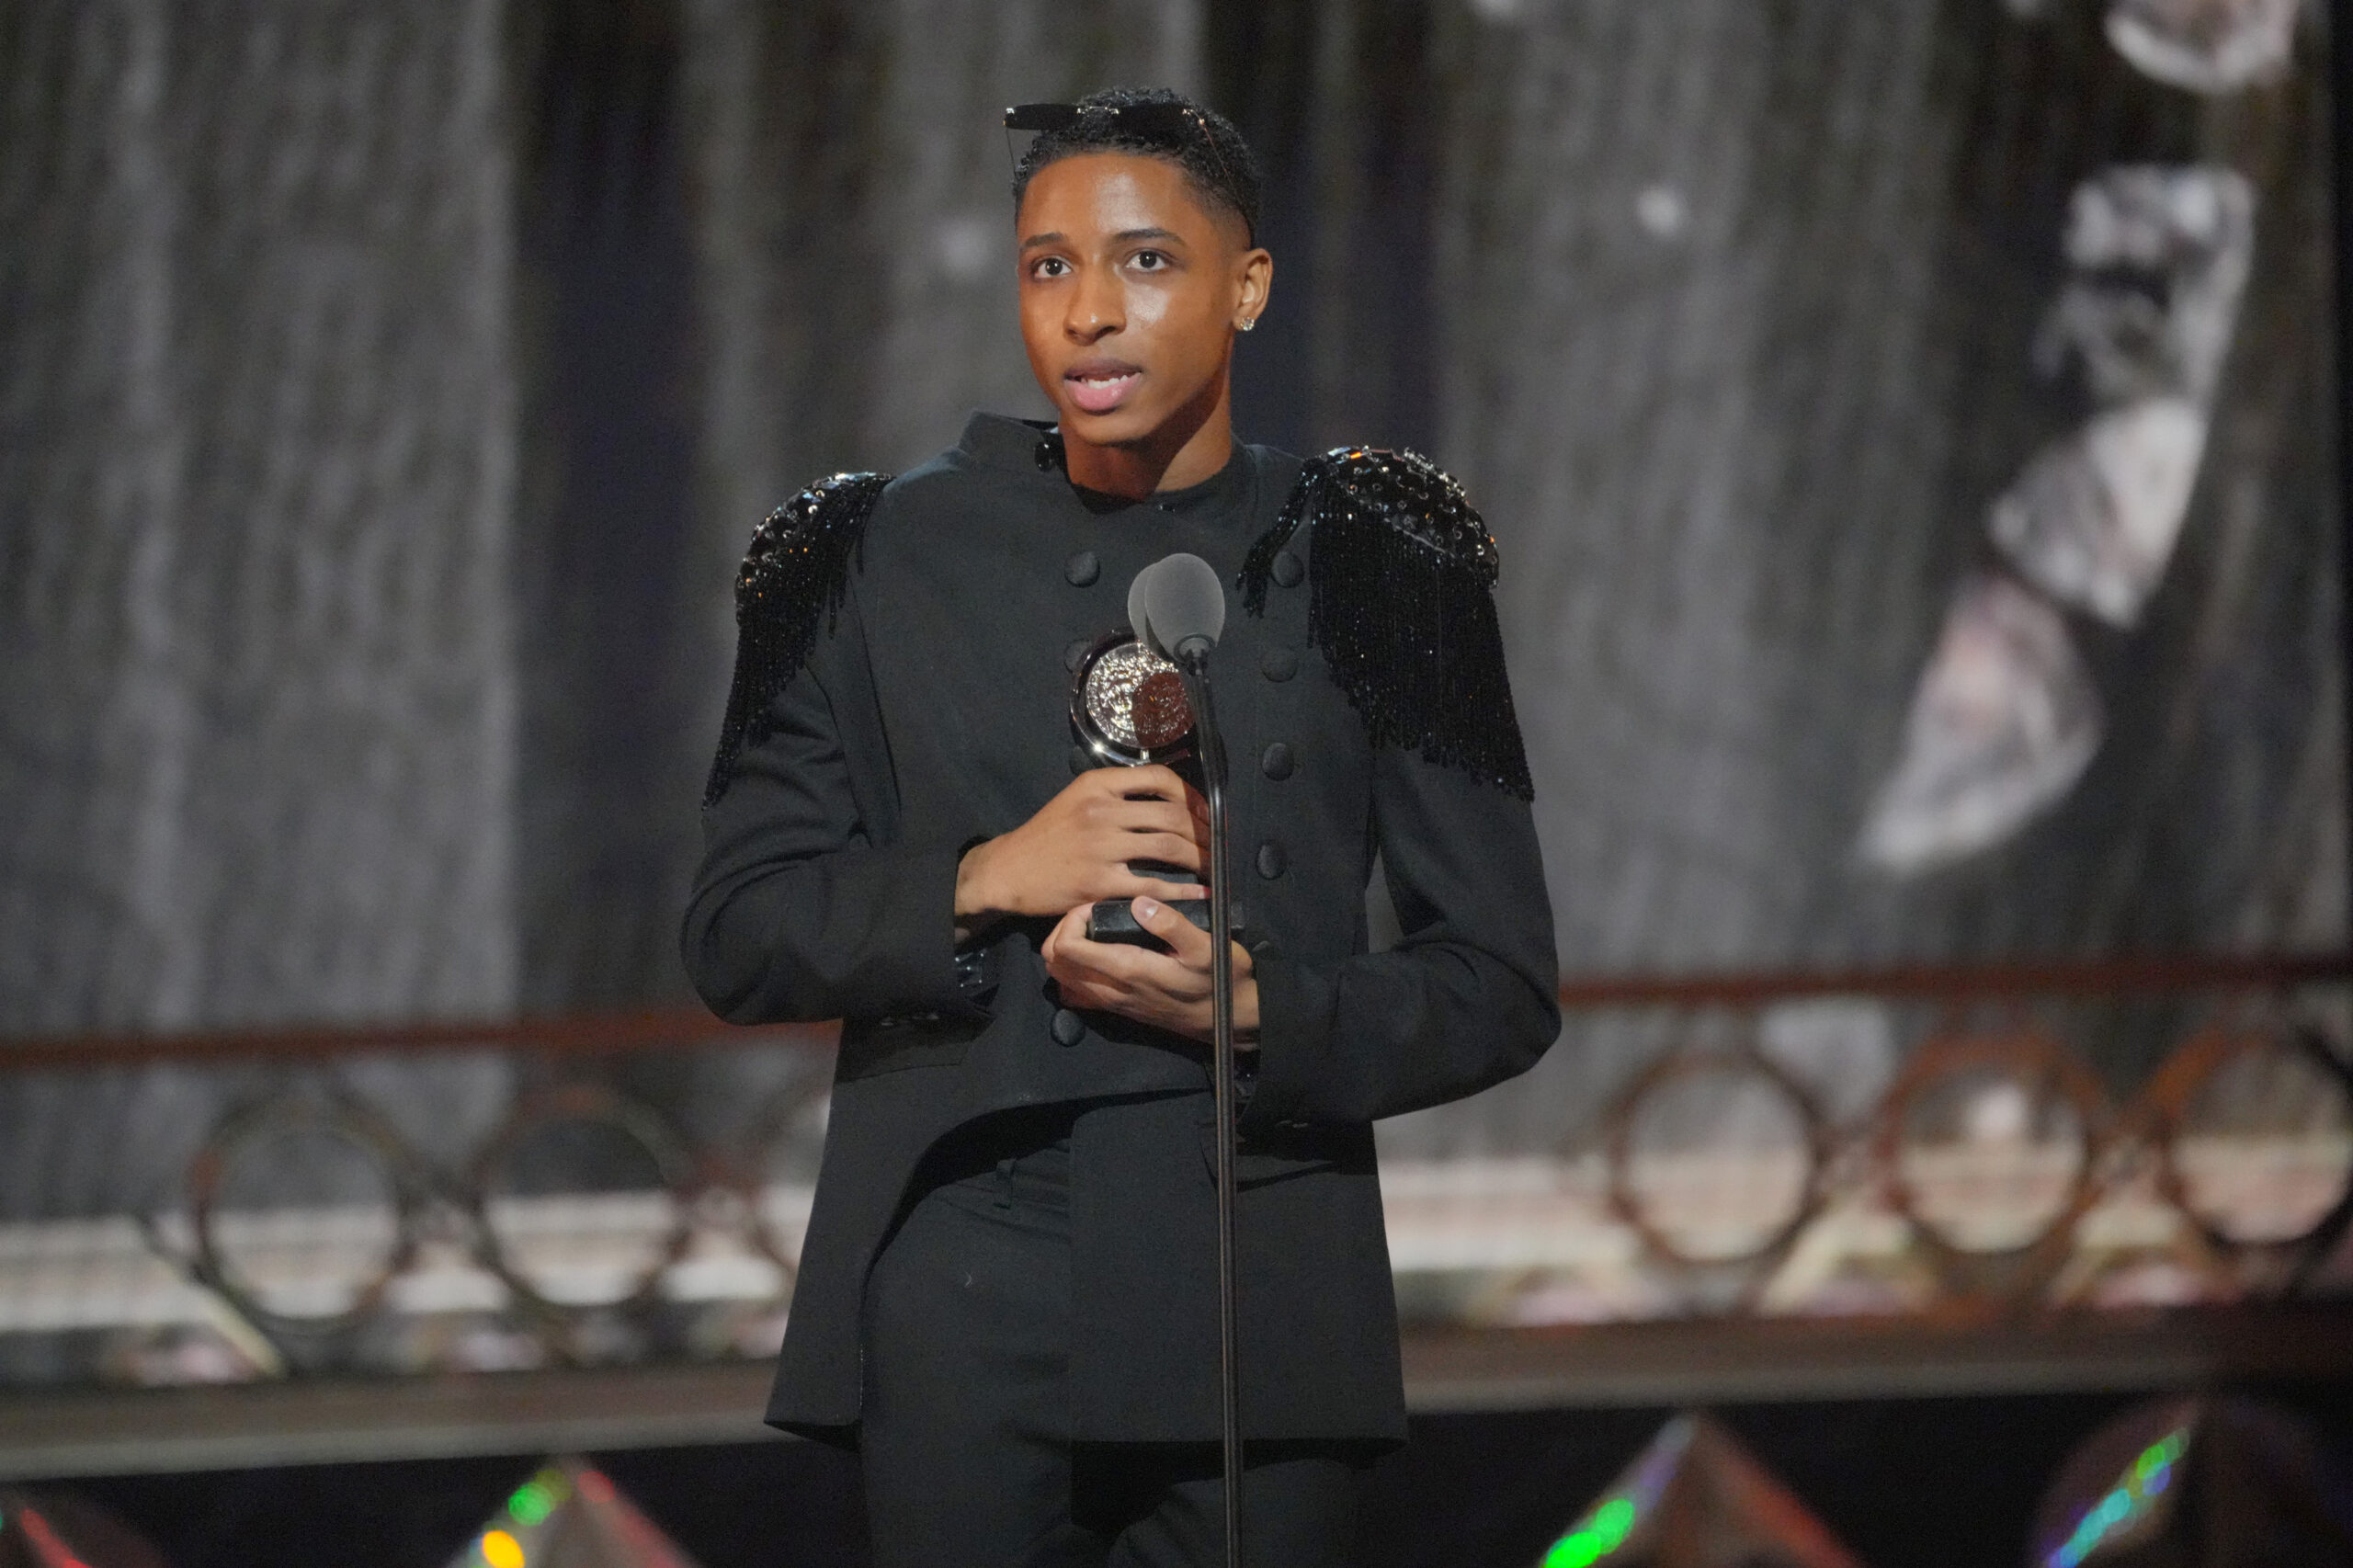 NEW YORK, NEW YORK - JUNE 12: Myles Frost accepts the award for Best Performance by an Actor in a Leading Role in a Musical for "MJ" onstage during the 75th Annual Tony Awards at Radio City Music Hall on June 12, 2022 in New York City. (Photo by Kevin Mazur/Getty Images for Tony Awards Productions)